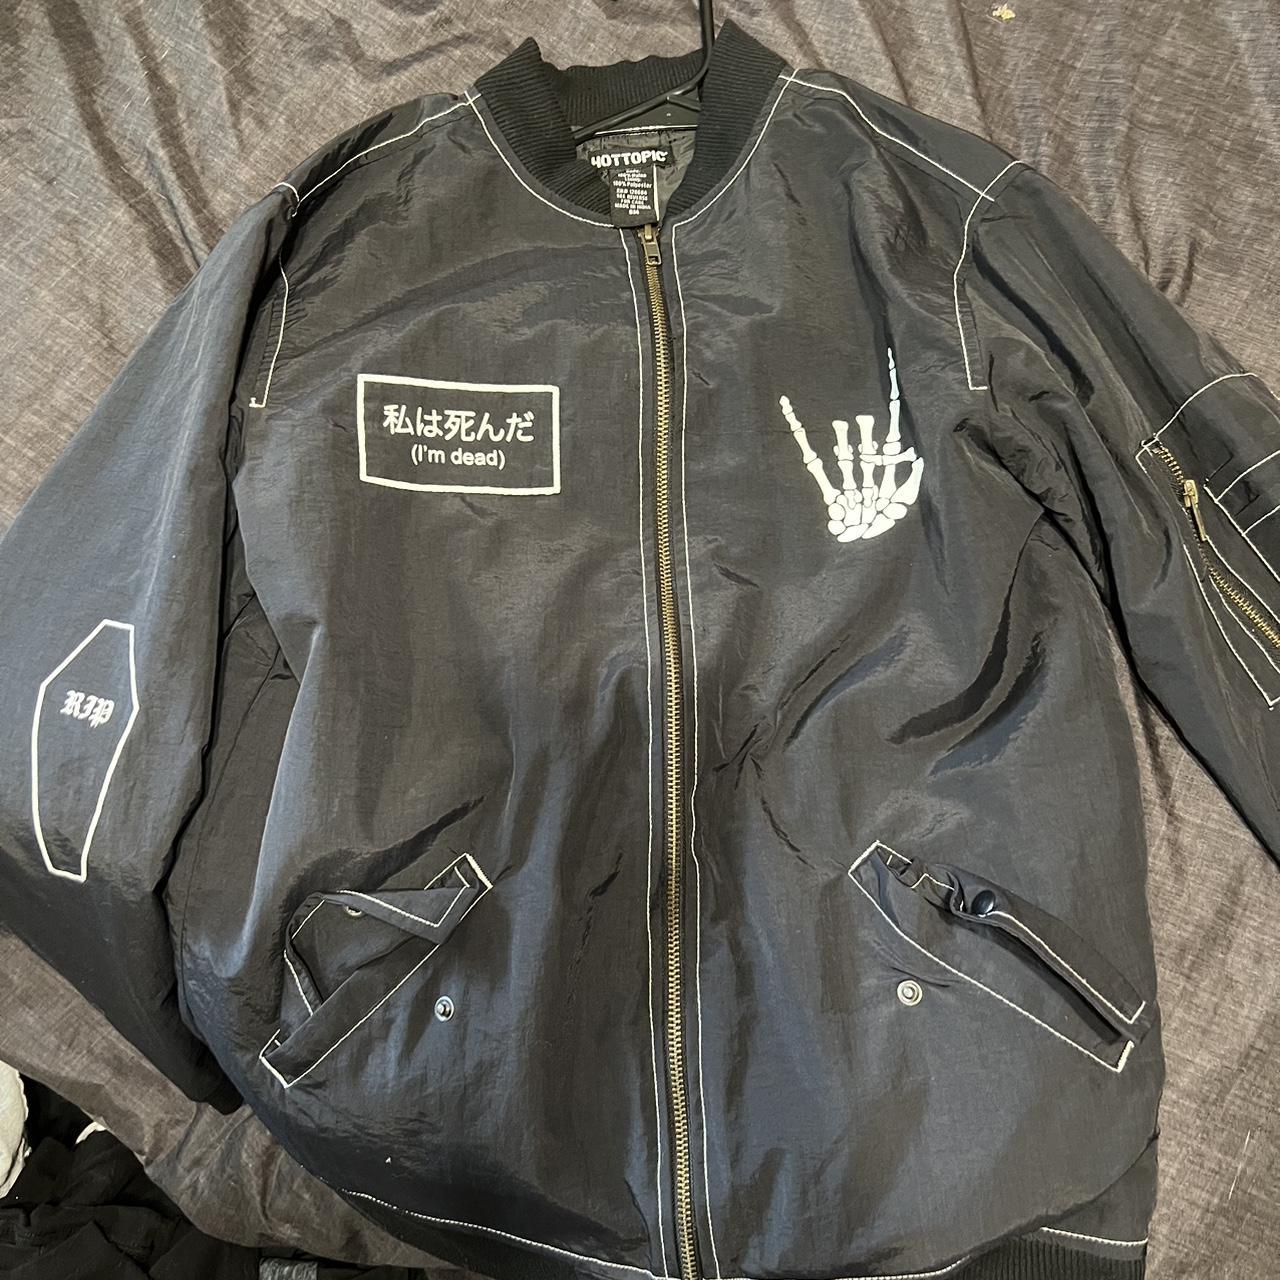 Hot Topic Bomber Jacket men’s small. Worn once - Depop